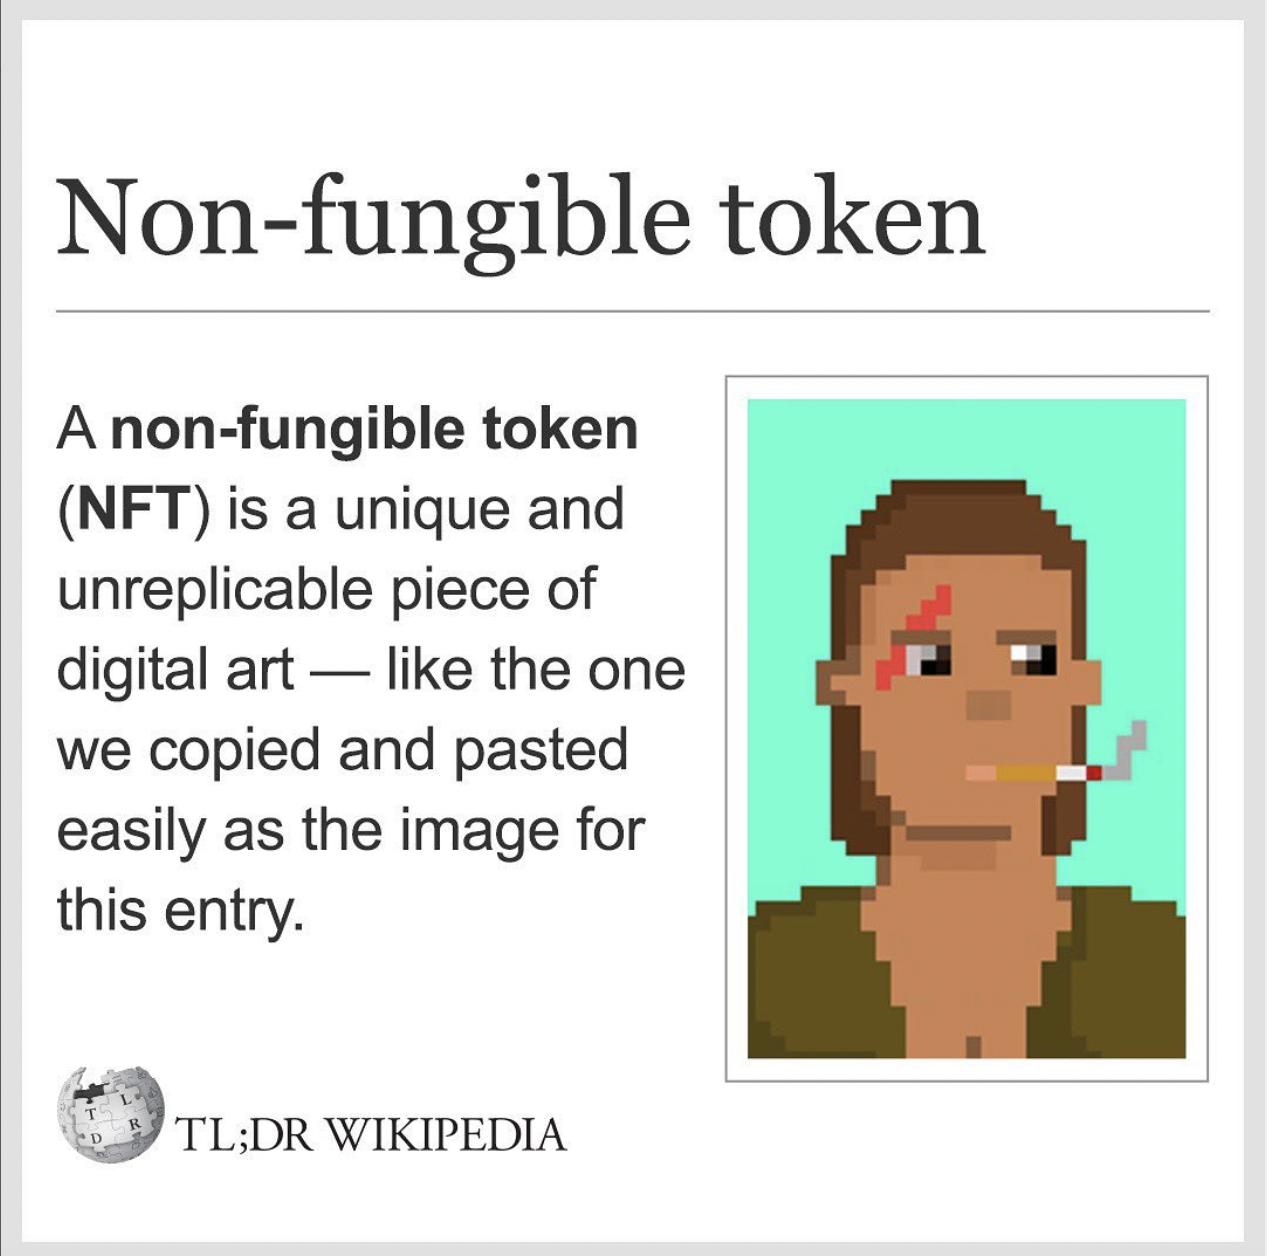 Wikipedia Memes - human behavior - Nonfungible token A nonfungible token Nft is a unique and unreplicable piece of digital art the one we copied and pasted easily as the image for this entry Tl;Dr Wikipedia